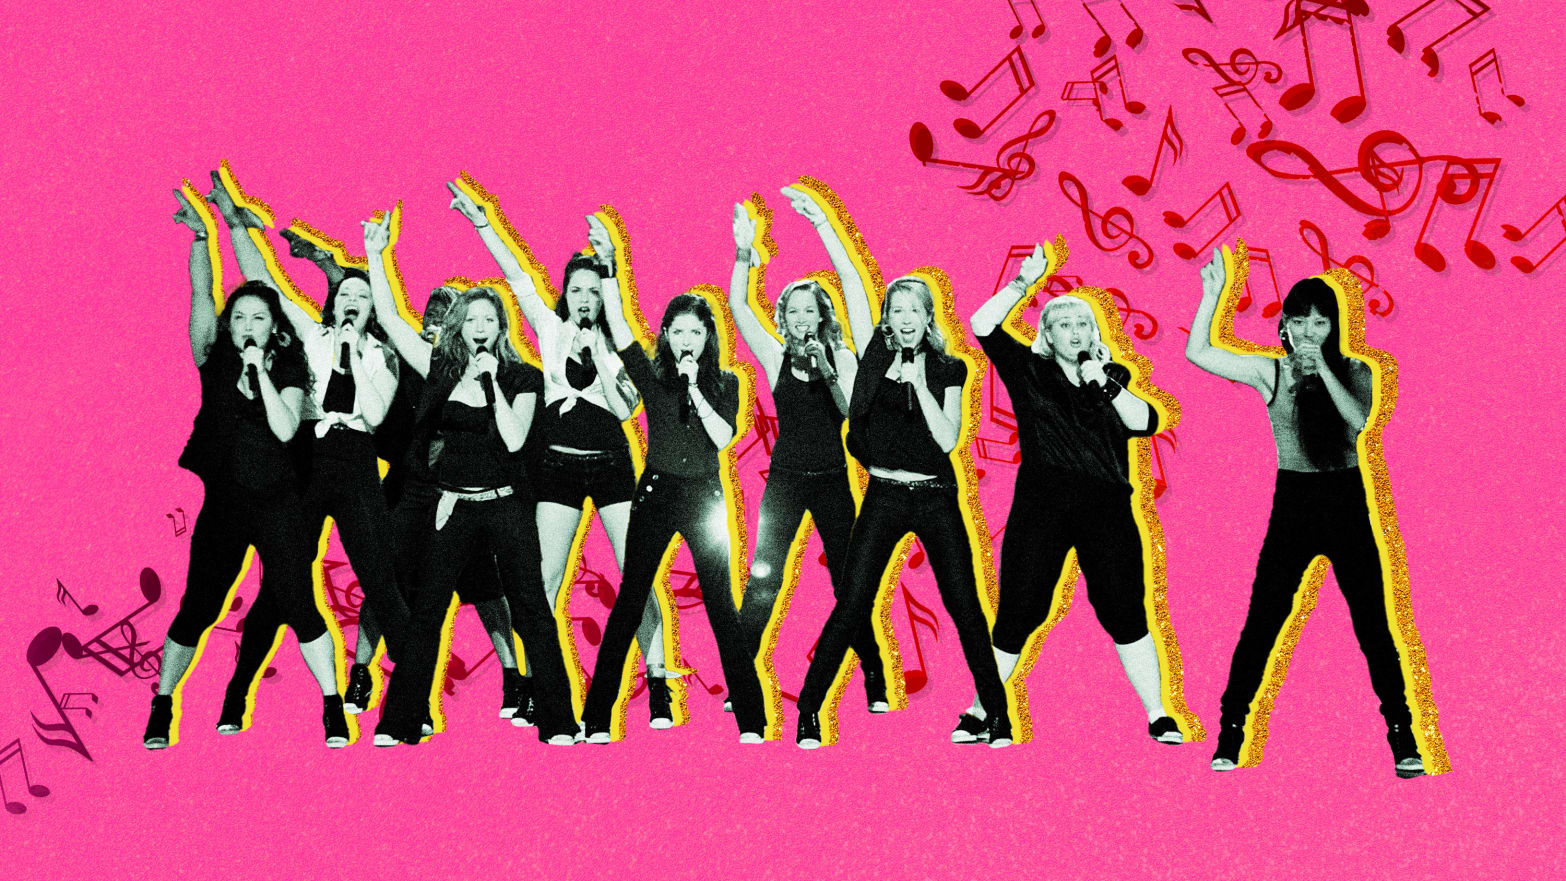 A photo illustration showing the final performance of Pitch Perfect.